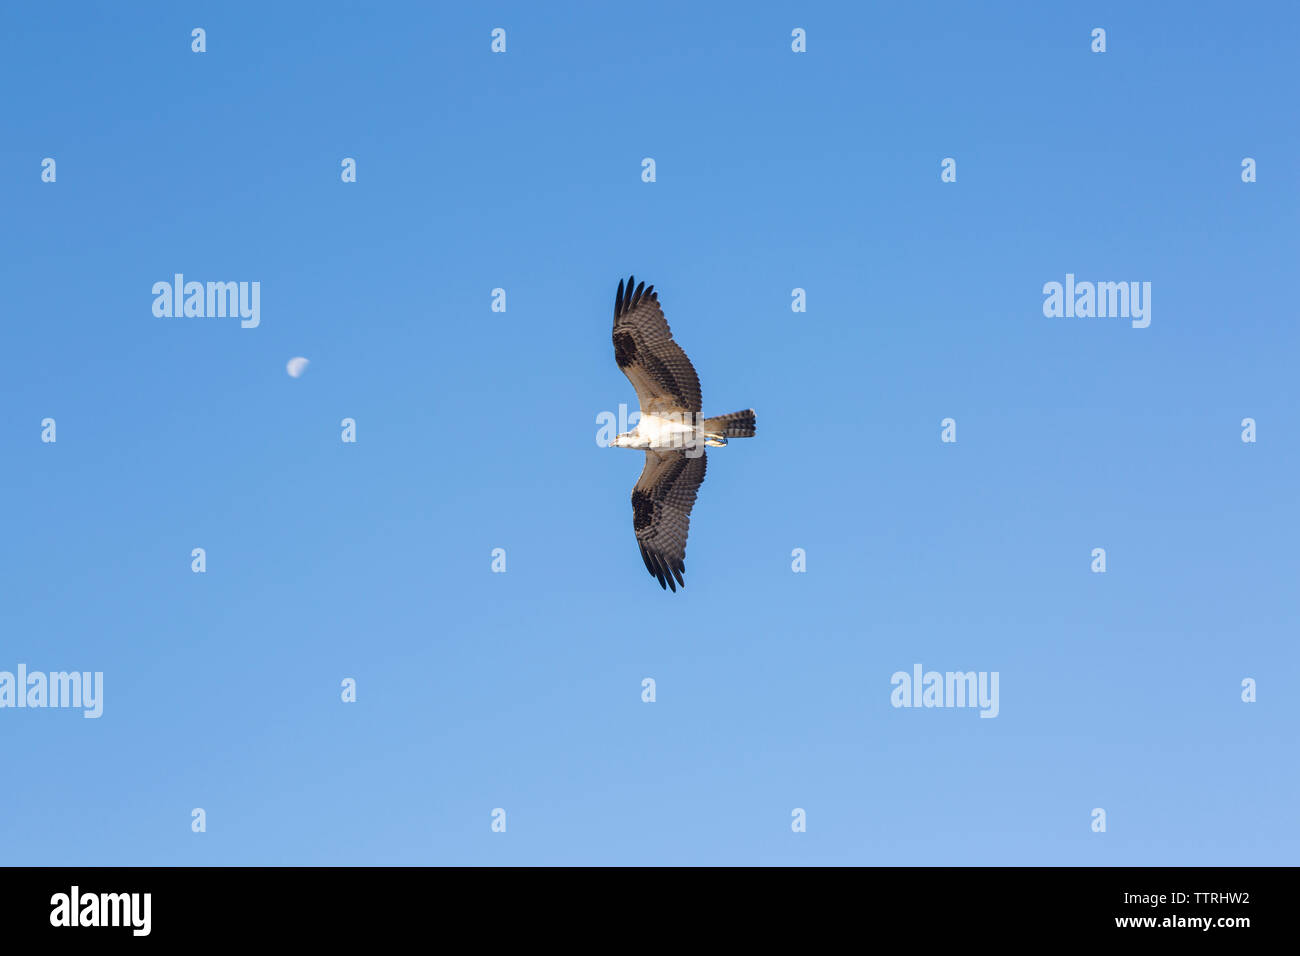 Low angle view of bird flying against clear blue sky during sunny day Stock Photo